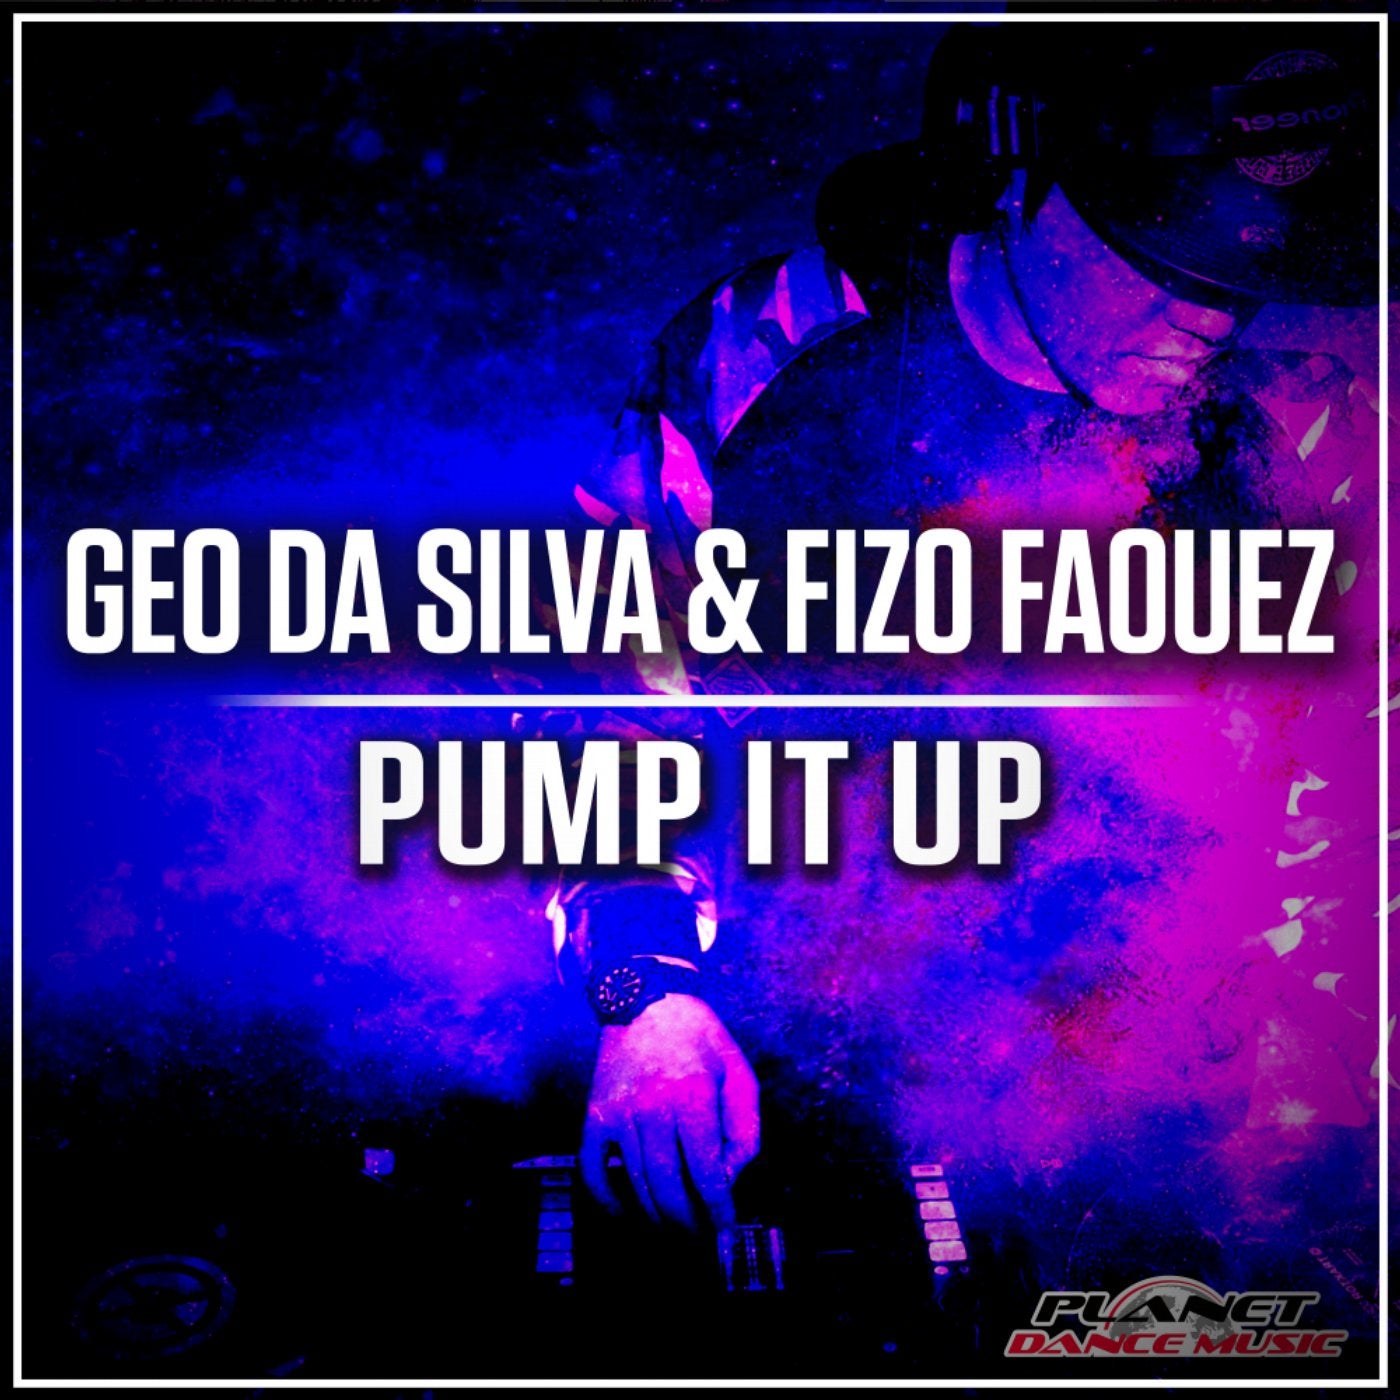 Pump It Up Mix) by Geo Silva, Fizo Faouez on Beatport